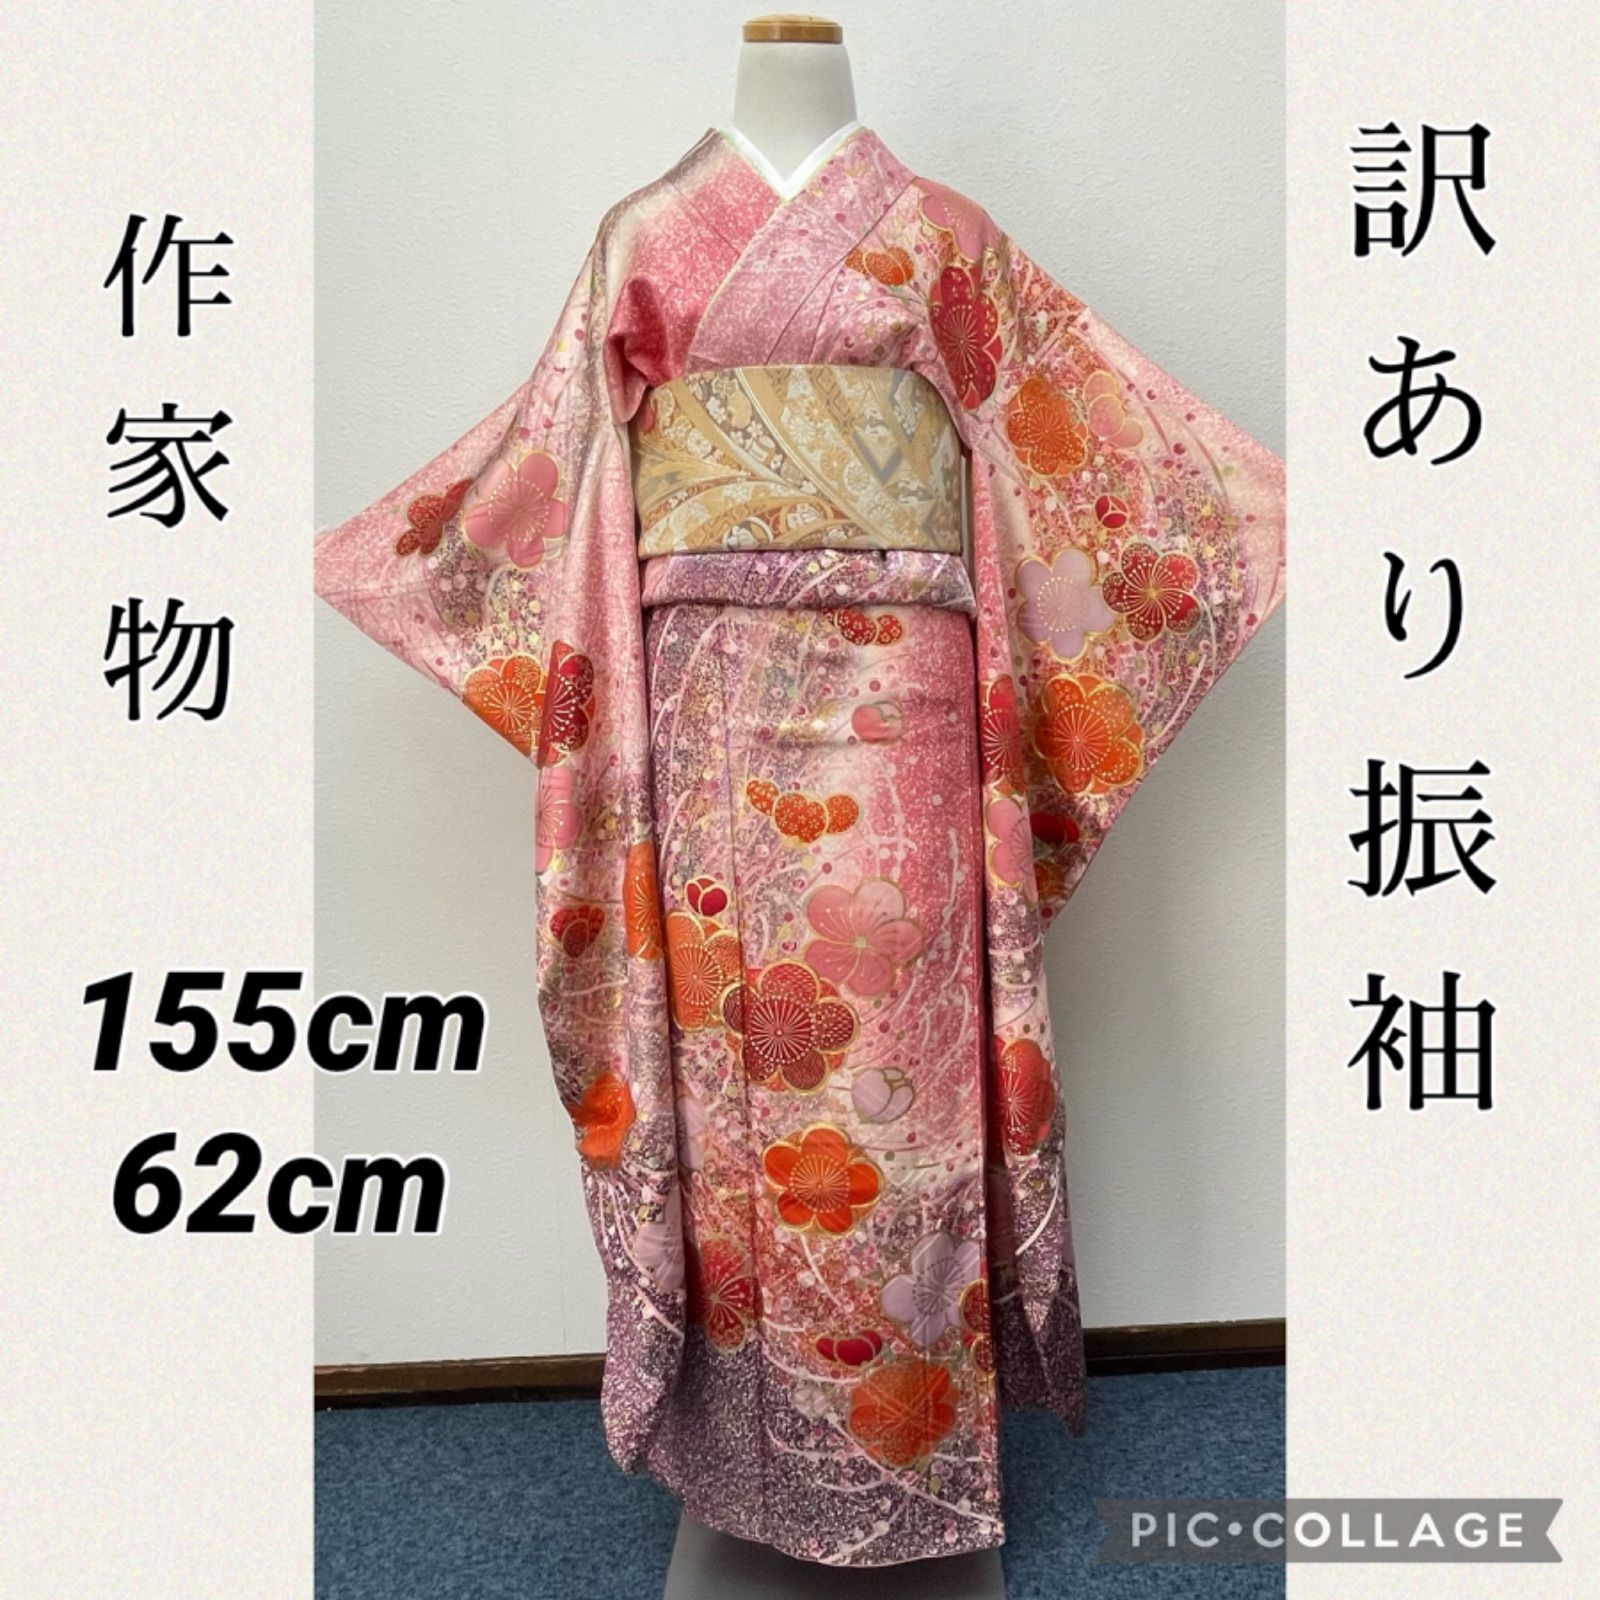 SALE／37%OFF】 こうちゃん正絹訪問着 豪華刺繍 銀通し 着物・浴衣 